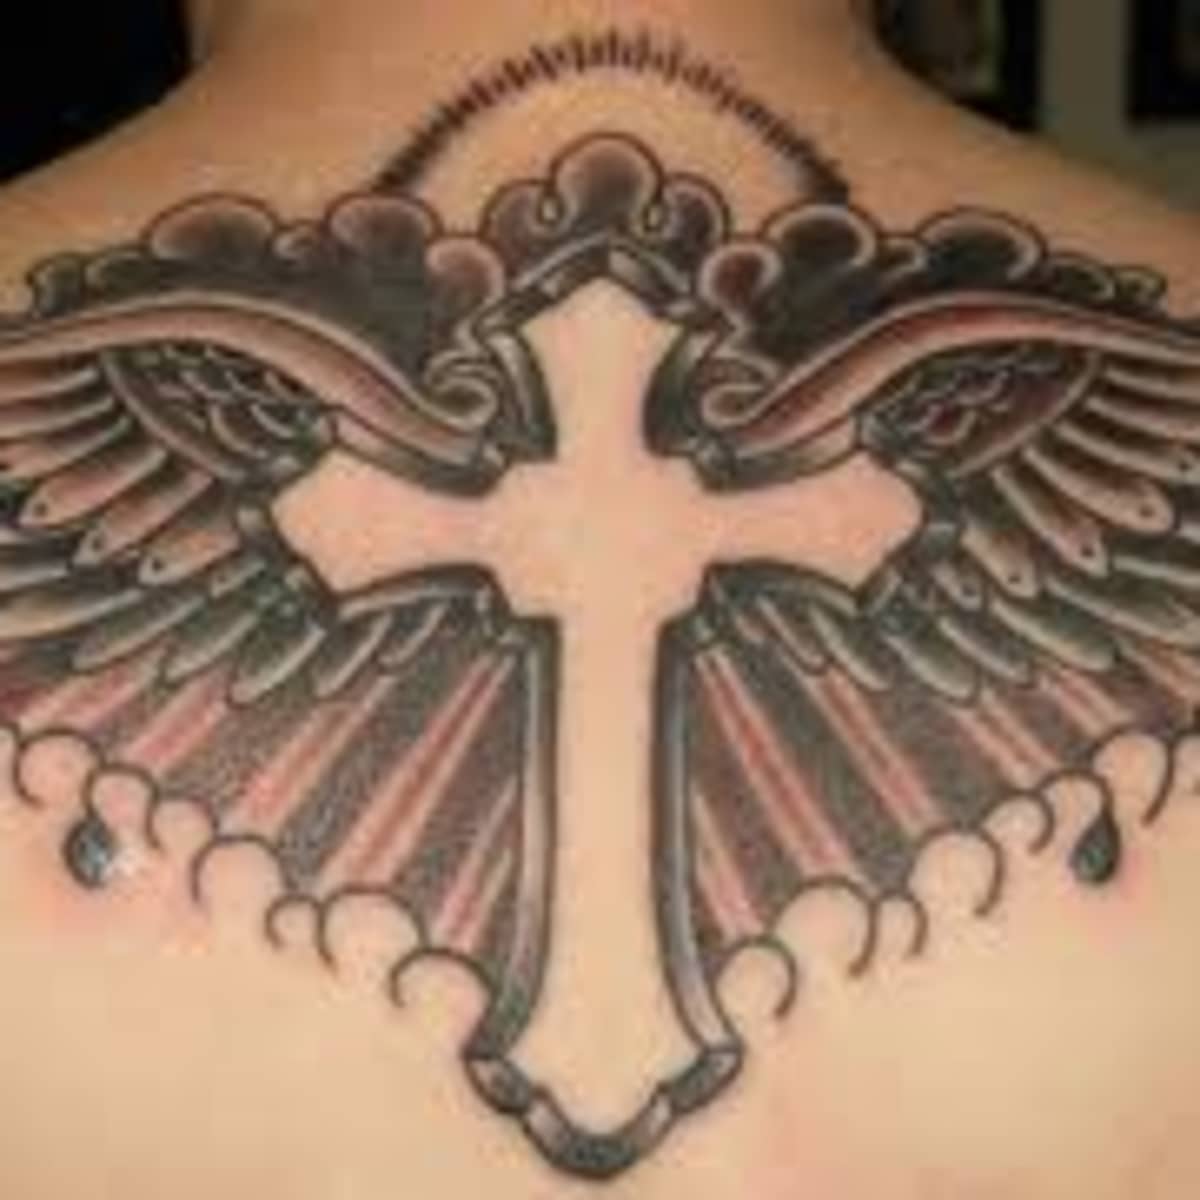 Christian Tattoos And Meanings-Religious Tattoo Symbols And Ideas-Christian  Tattoo Pictures - HubPages